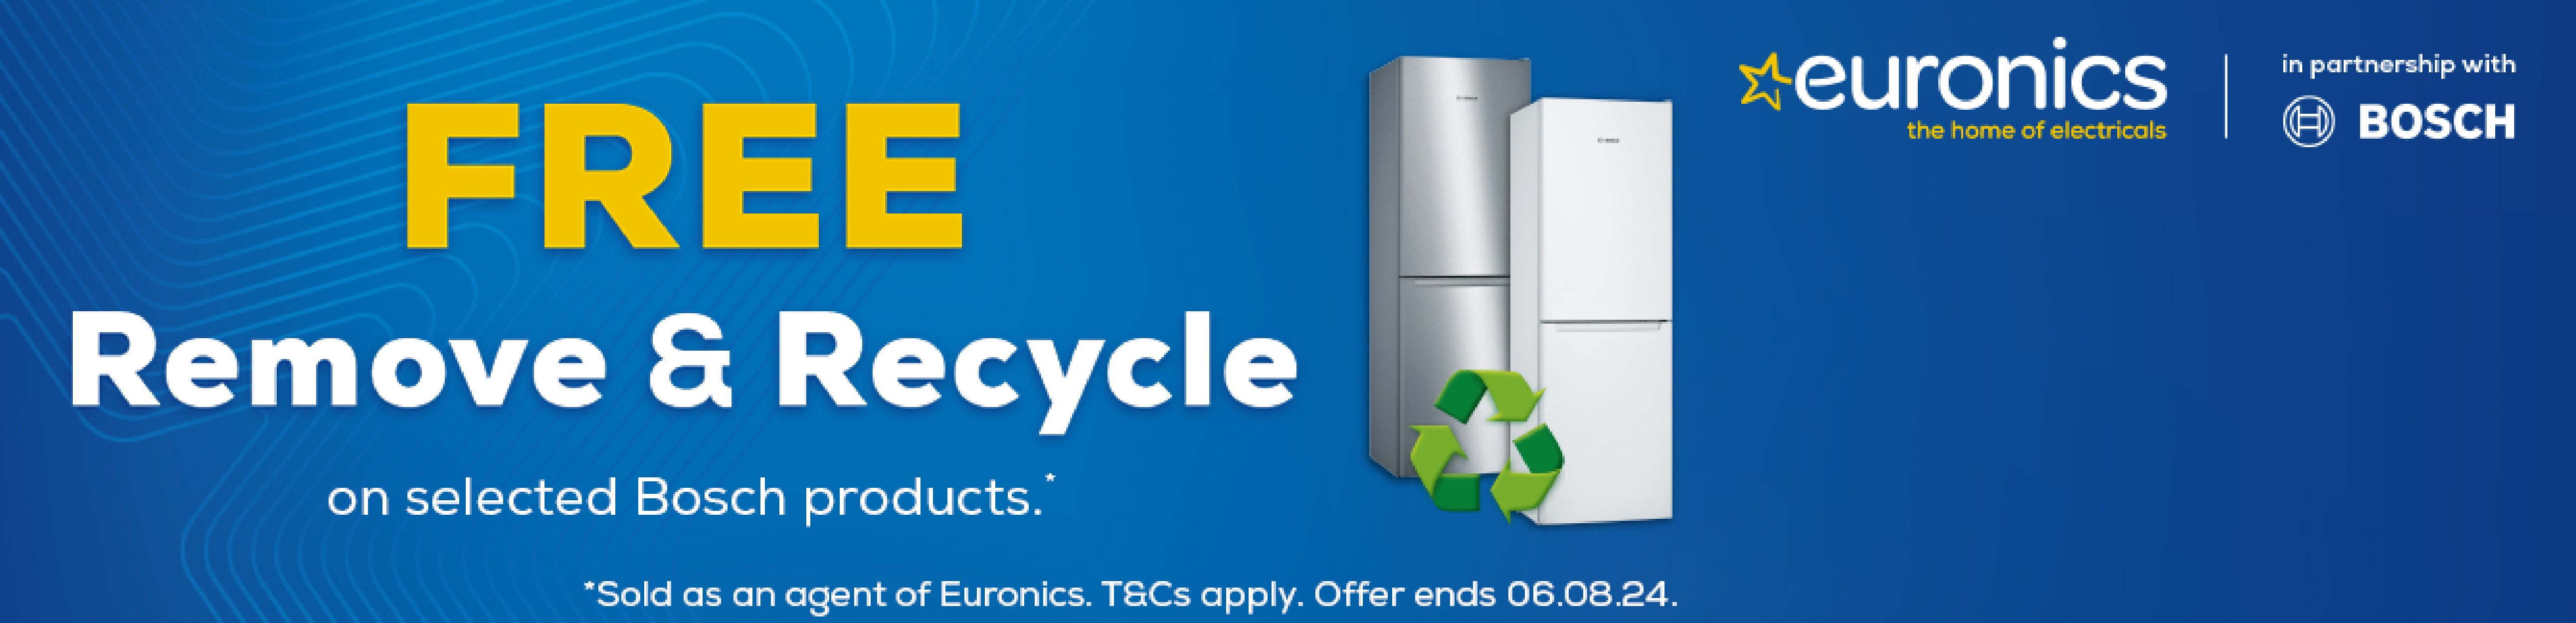 Bosch Free Remove & Recycle Cooling